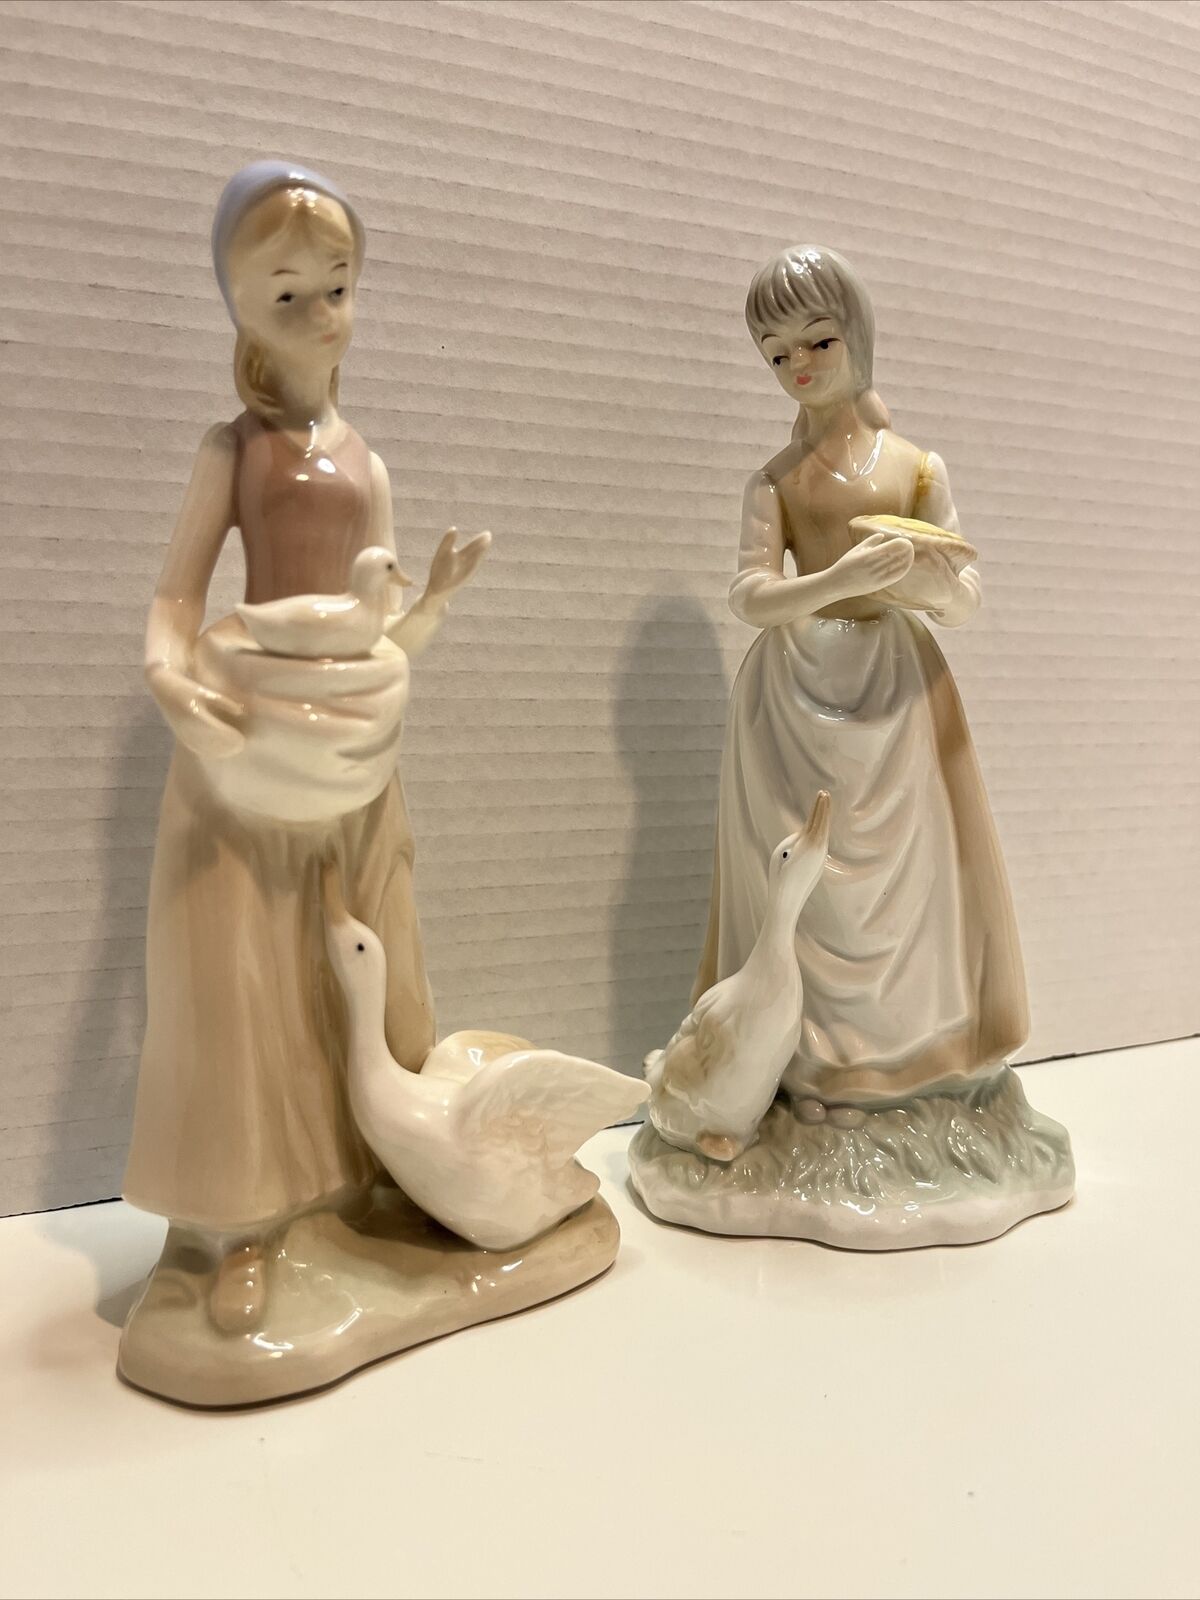 2 Vintage Glazed Porcelain Figurine in Lladro Style Girl With Geese Beautiful